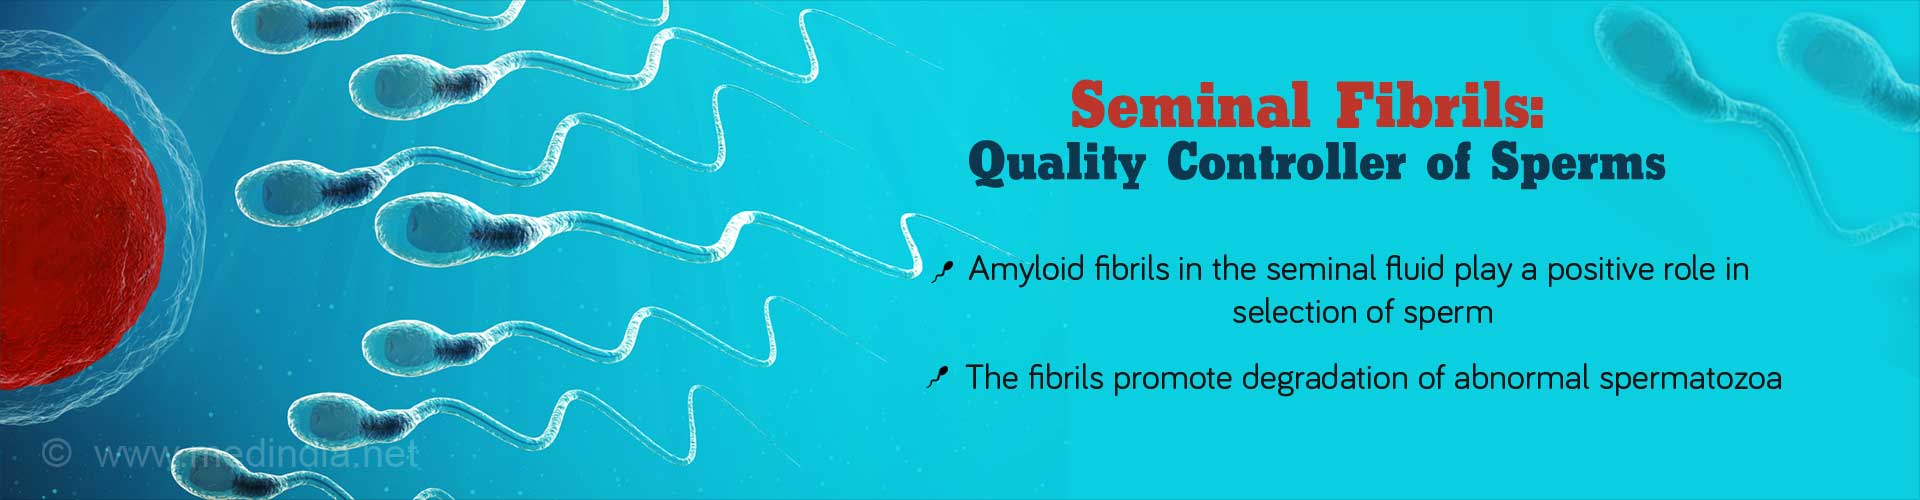 Seminal Fibrils: Quality Controller of Sperms
- amyloid fibrils in the seminal fluid play a positive role in selection od sperm
- The fibrils promote degradation of abnormal spermatozoa